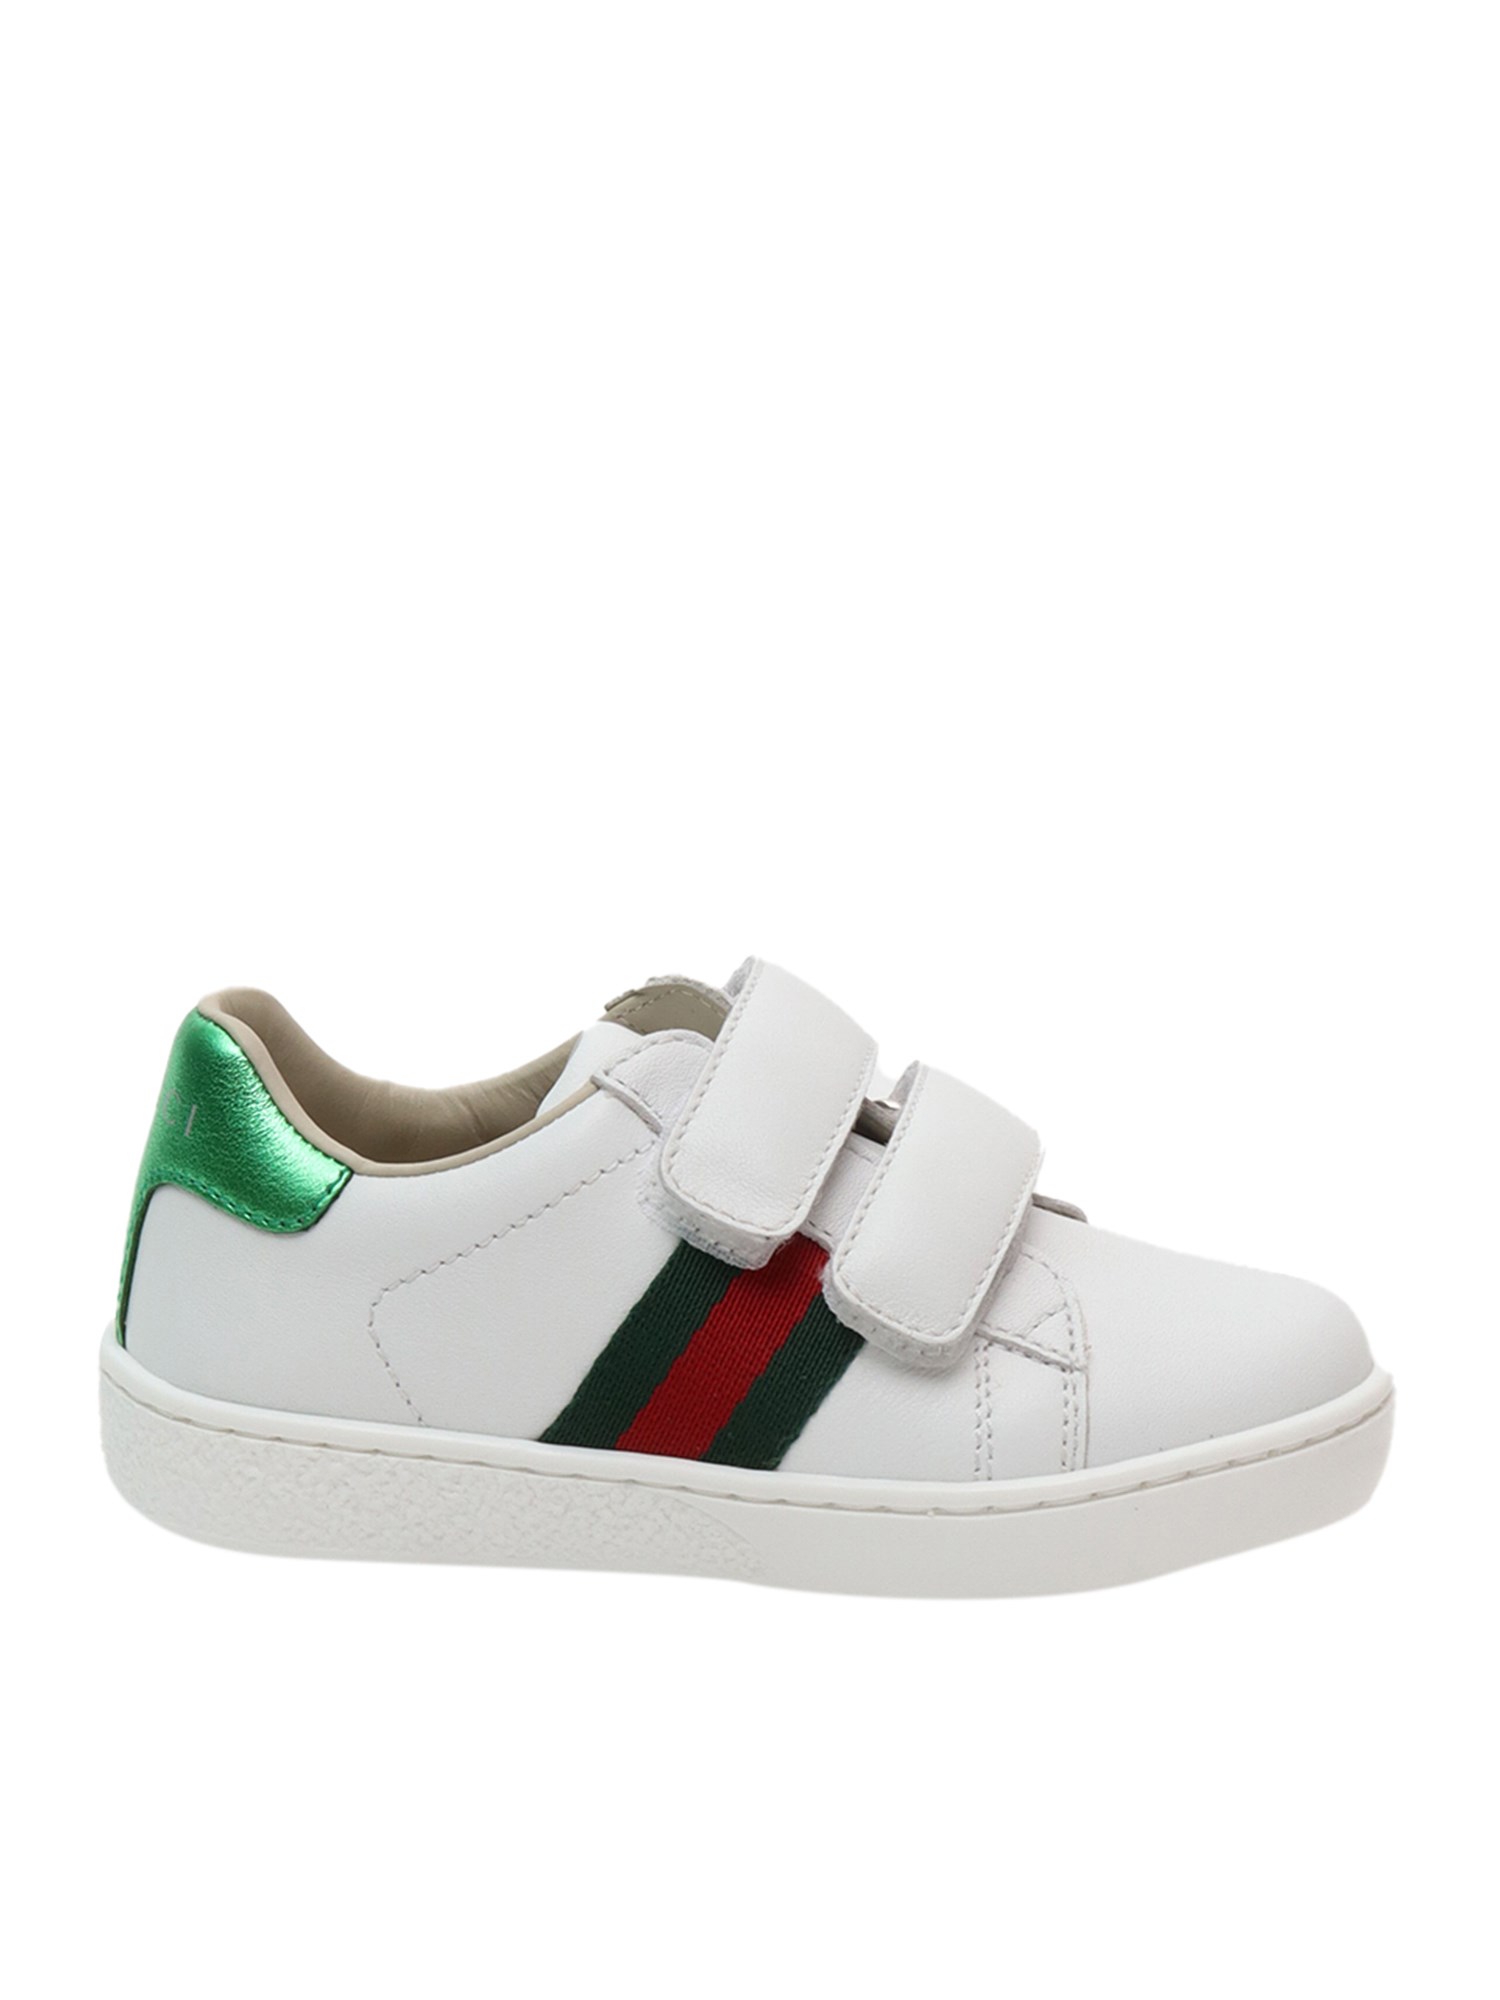 Gucci Kids' New Ace Sneakers In White